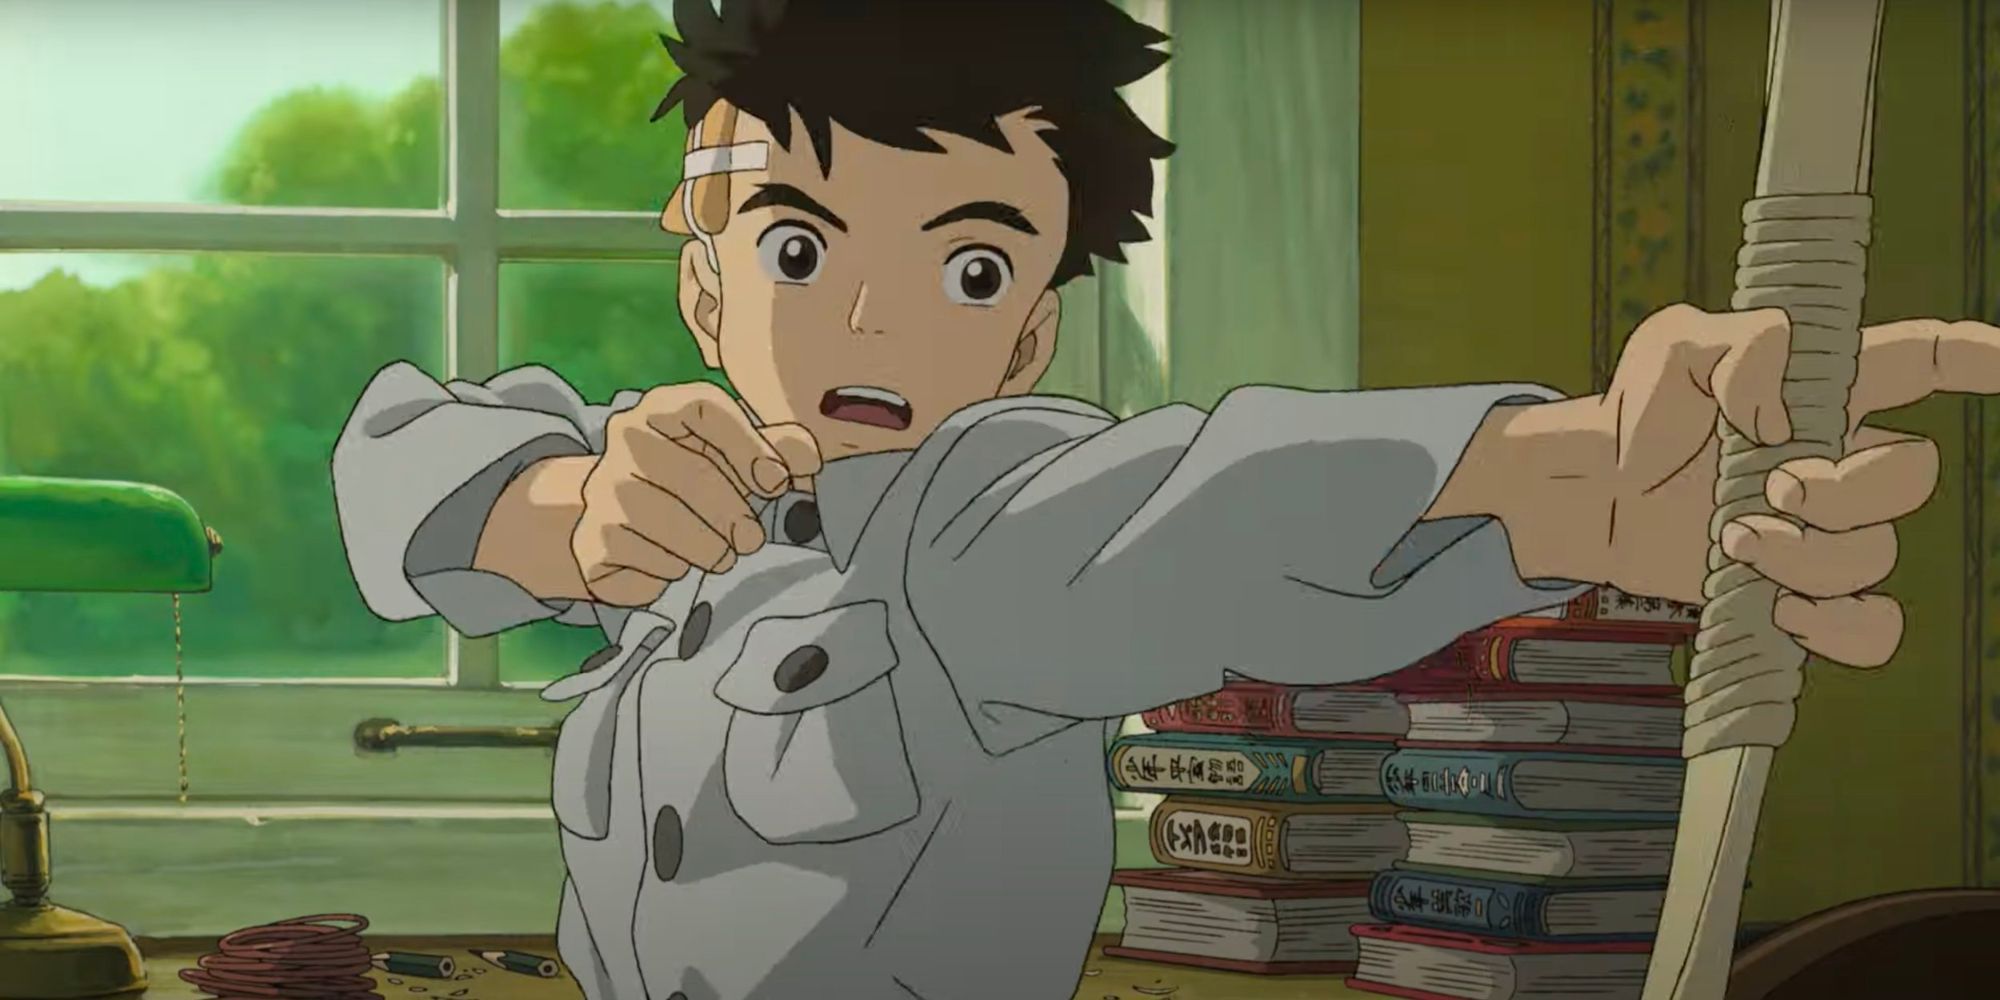 Studio Ghibli Gets First-Ever 4K UHD Blu-ray Release Date With The Boy and the Heron